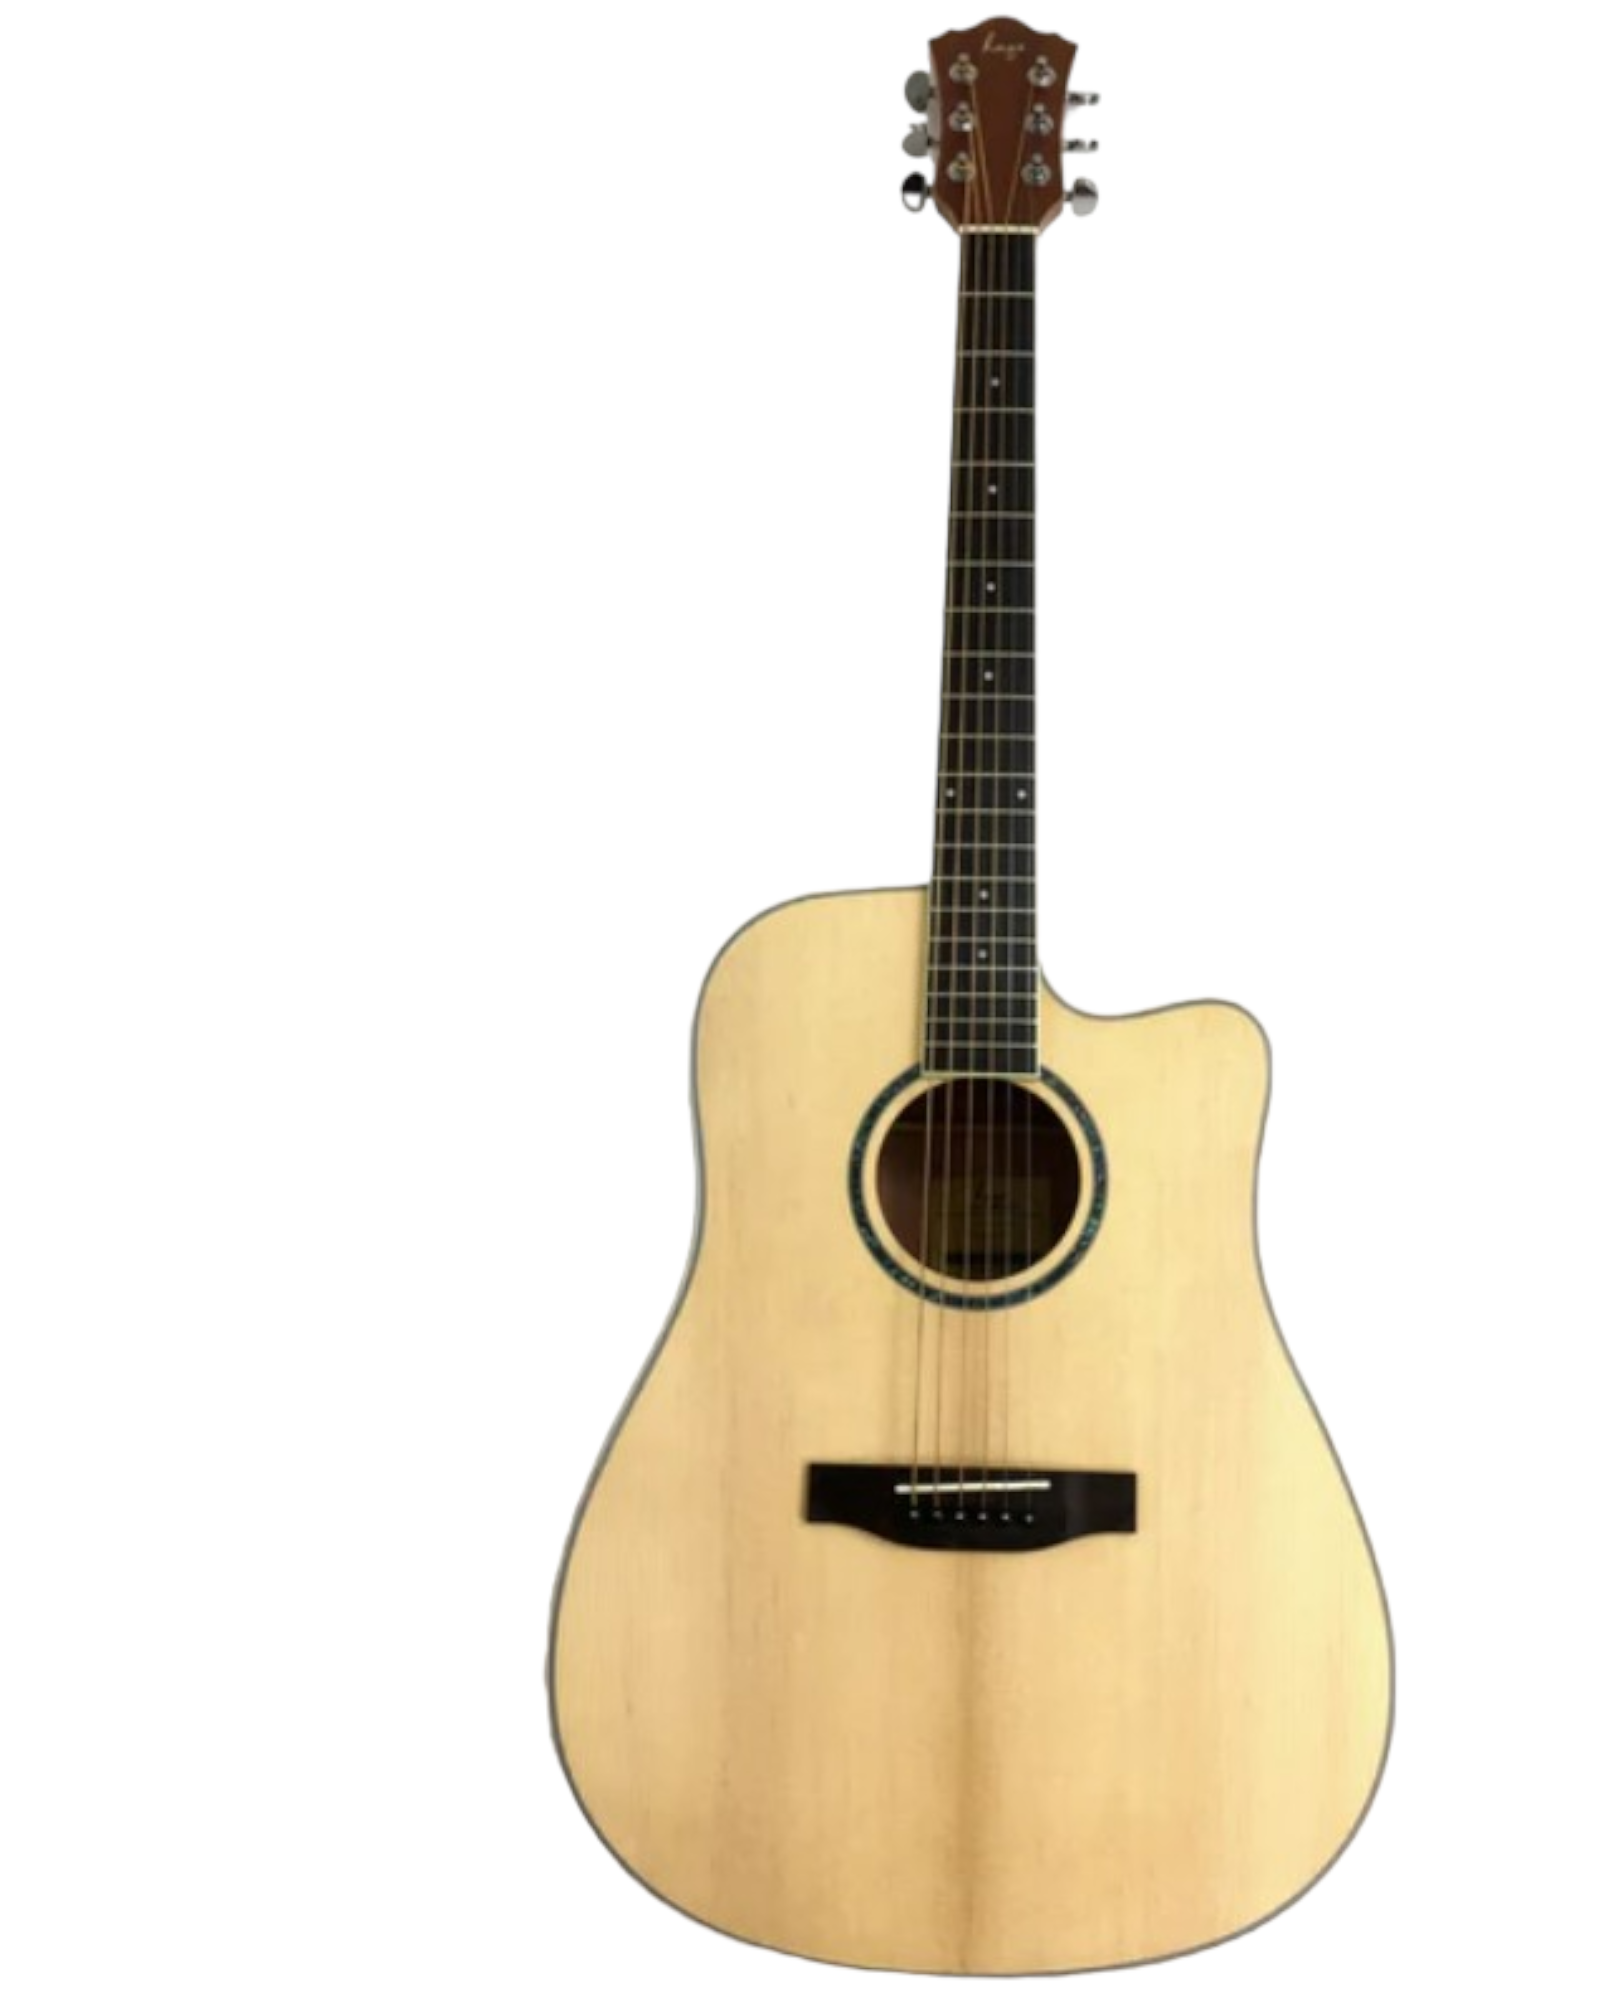 Haze Solid Spruce Top Dreadnought Cutaway Acoustic Guitar - Natural CD60SCN